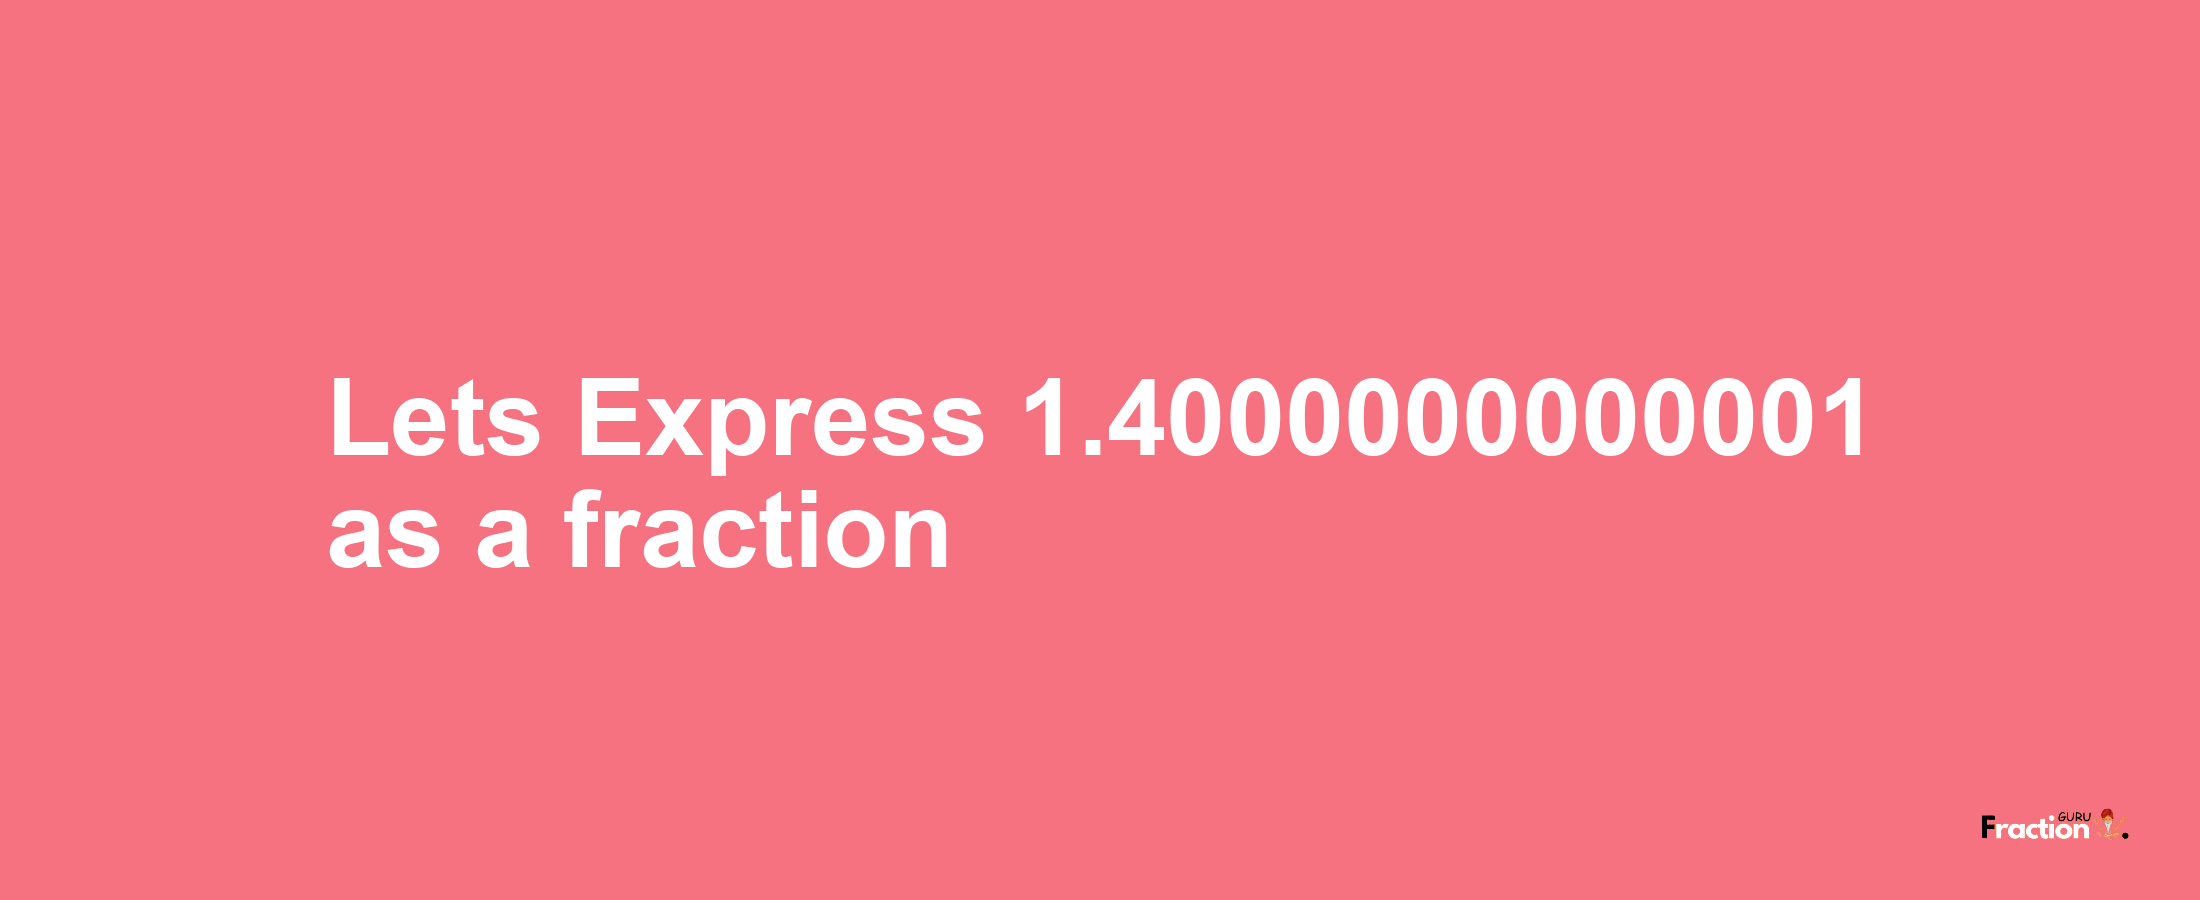 Lets Express 1.4000000000001 as afraction